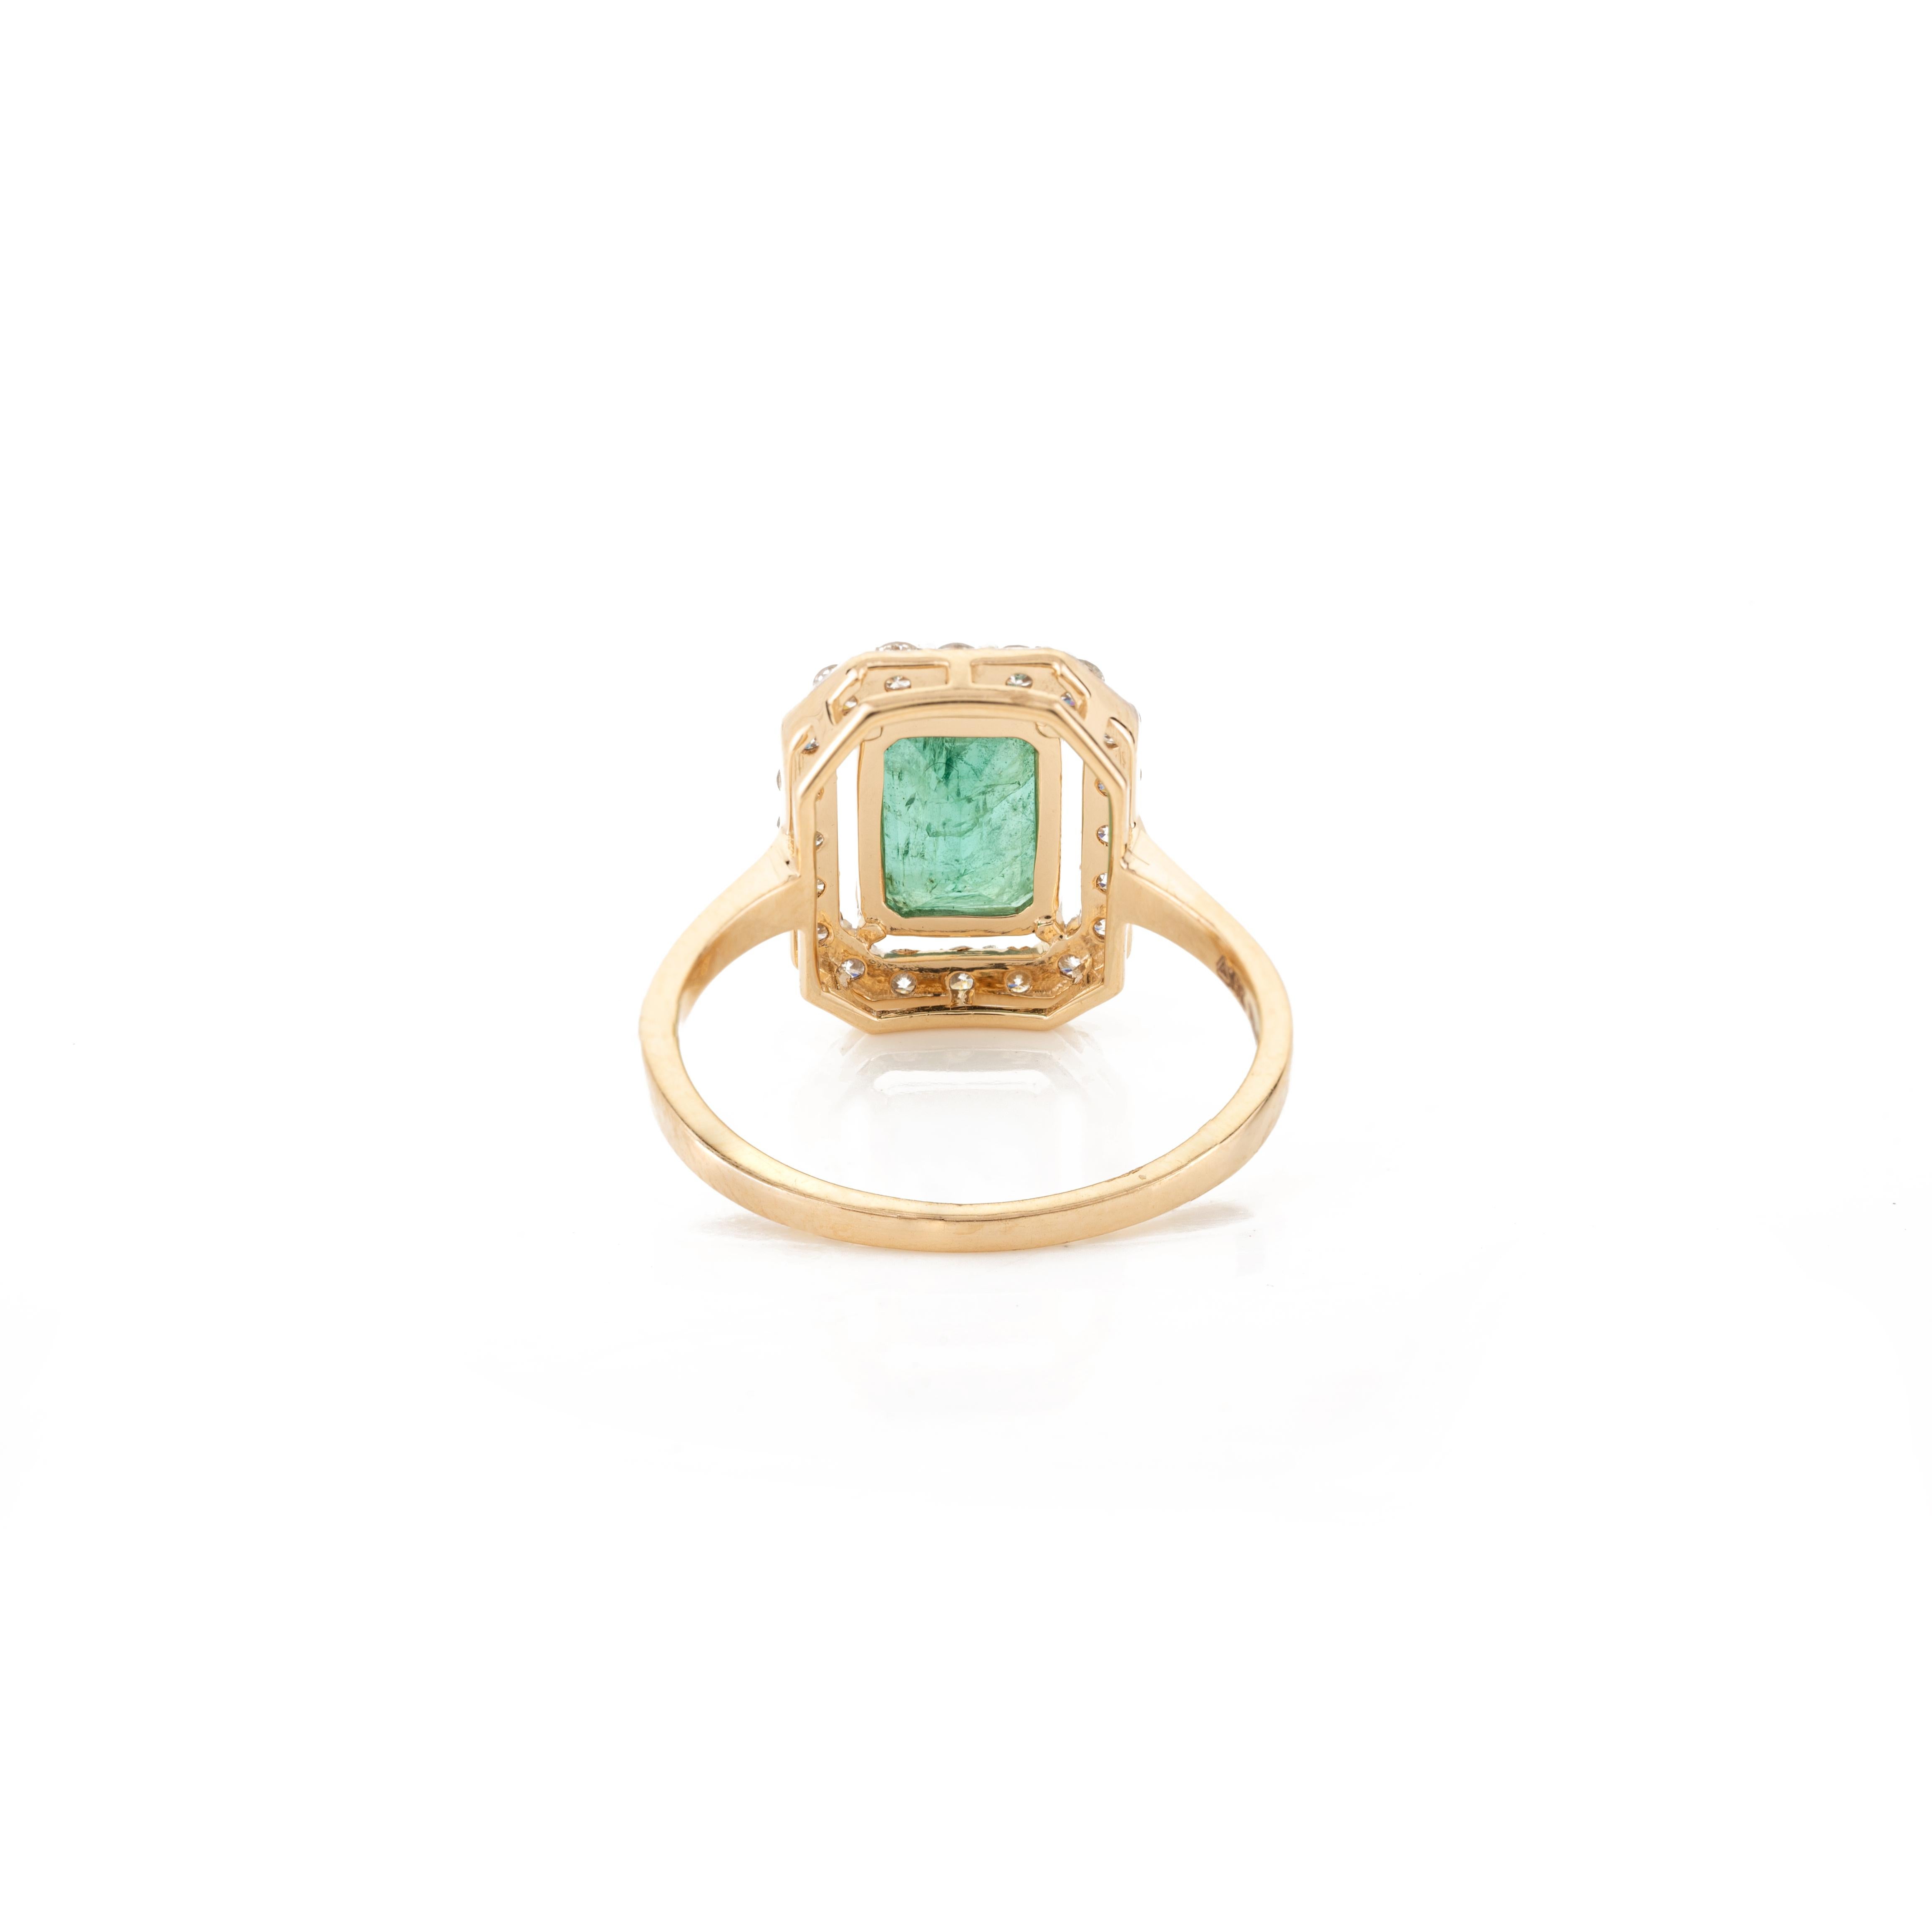 For Sale:  Rare Green Emerald Diamond Halo Engagement Ring in 18k Solid Yellow Gold 7